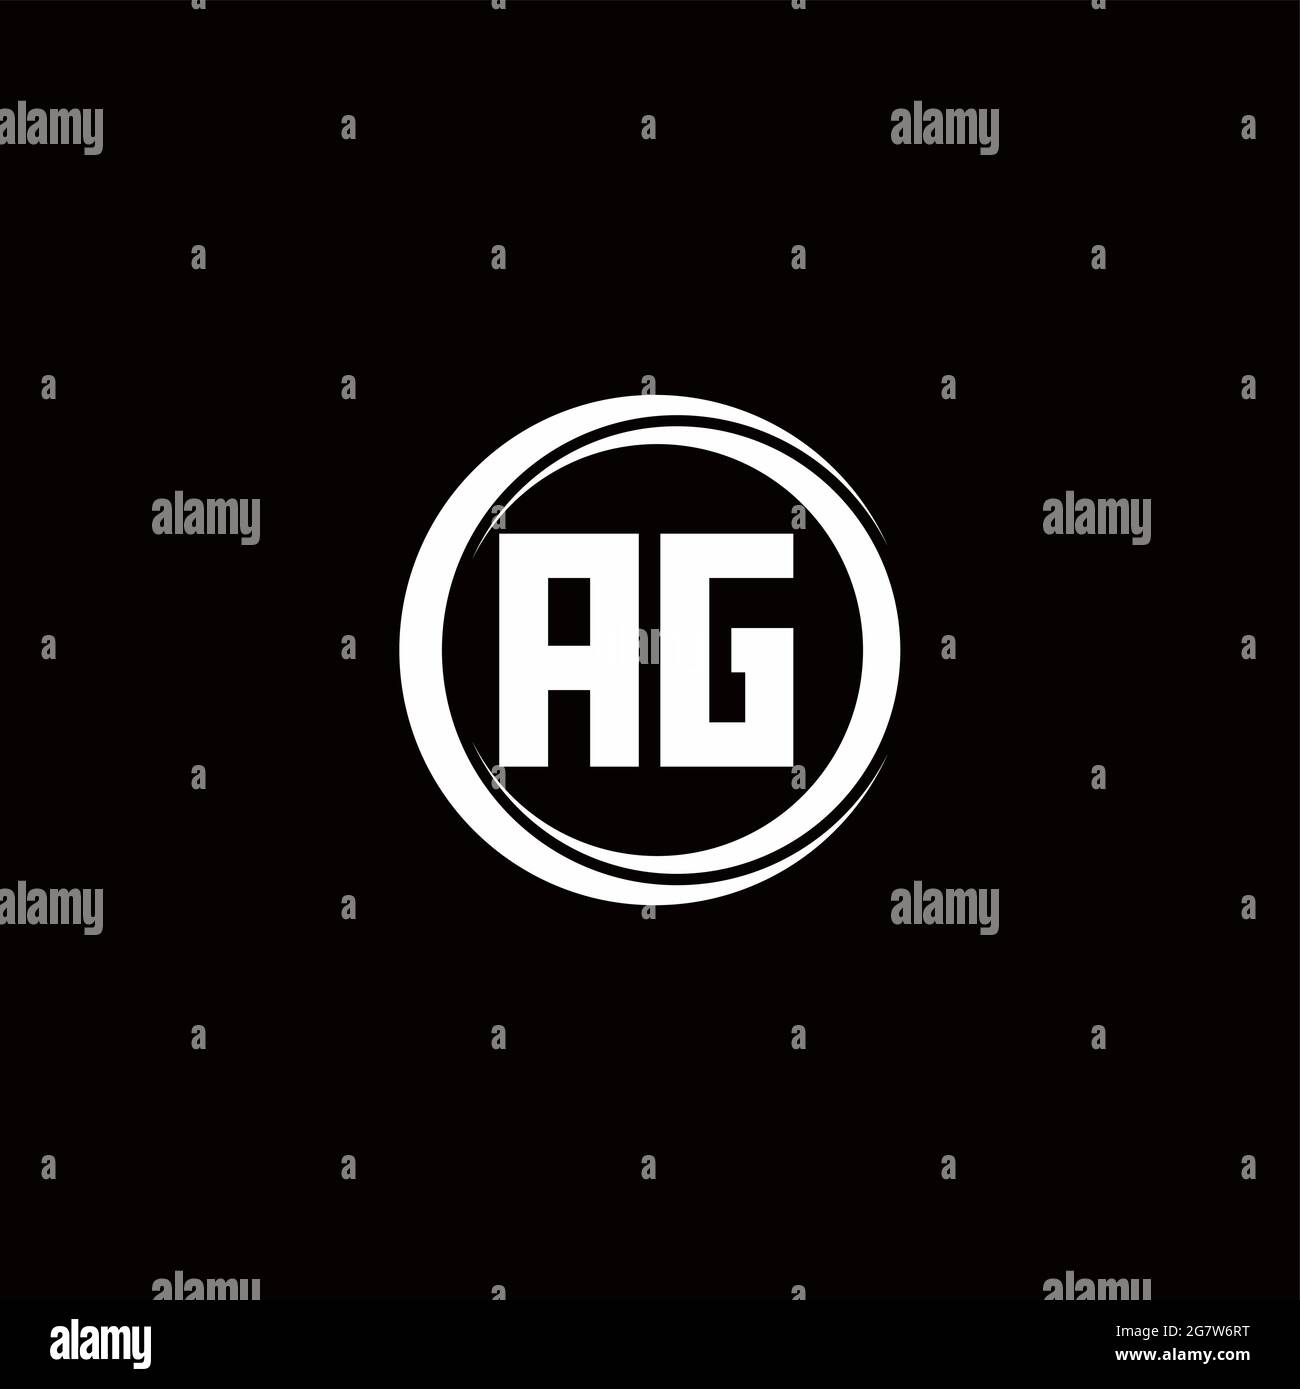 AG logo initial letter monogram with circle slice rounded design ...